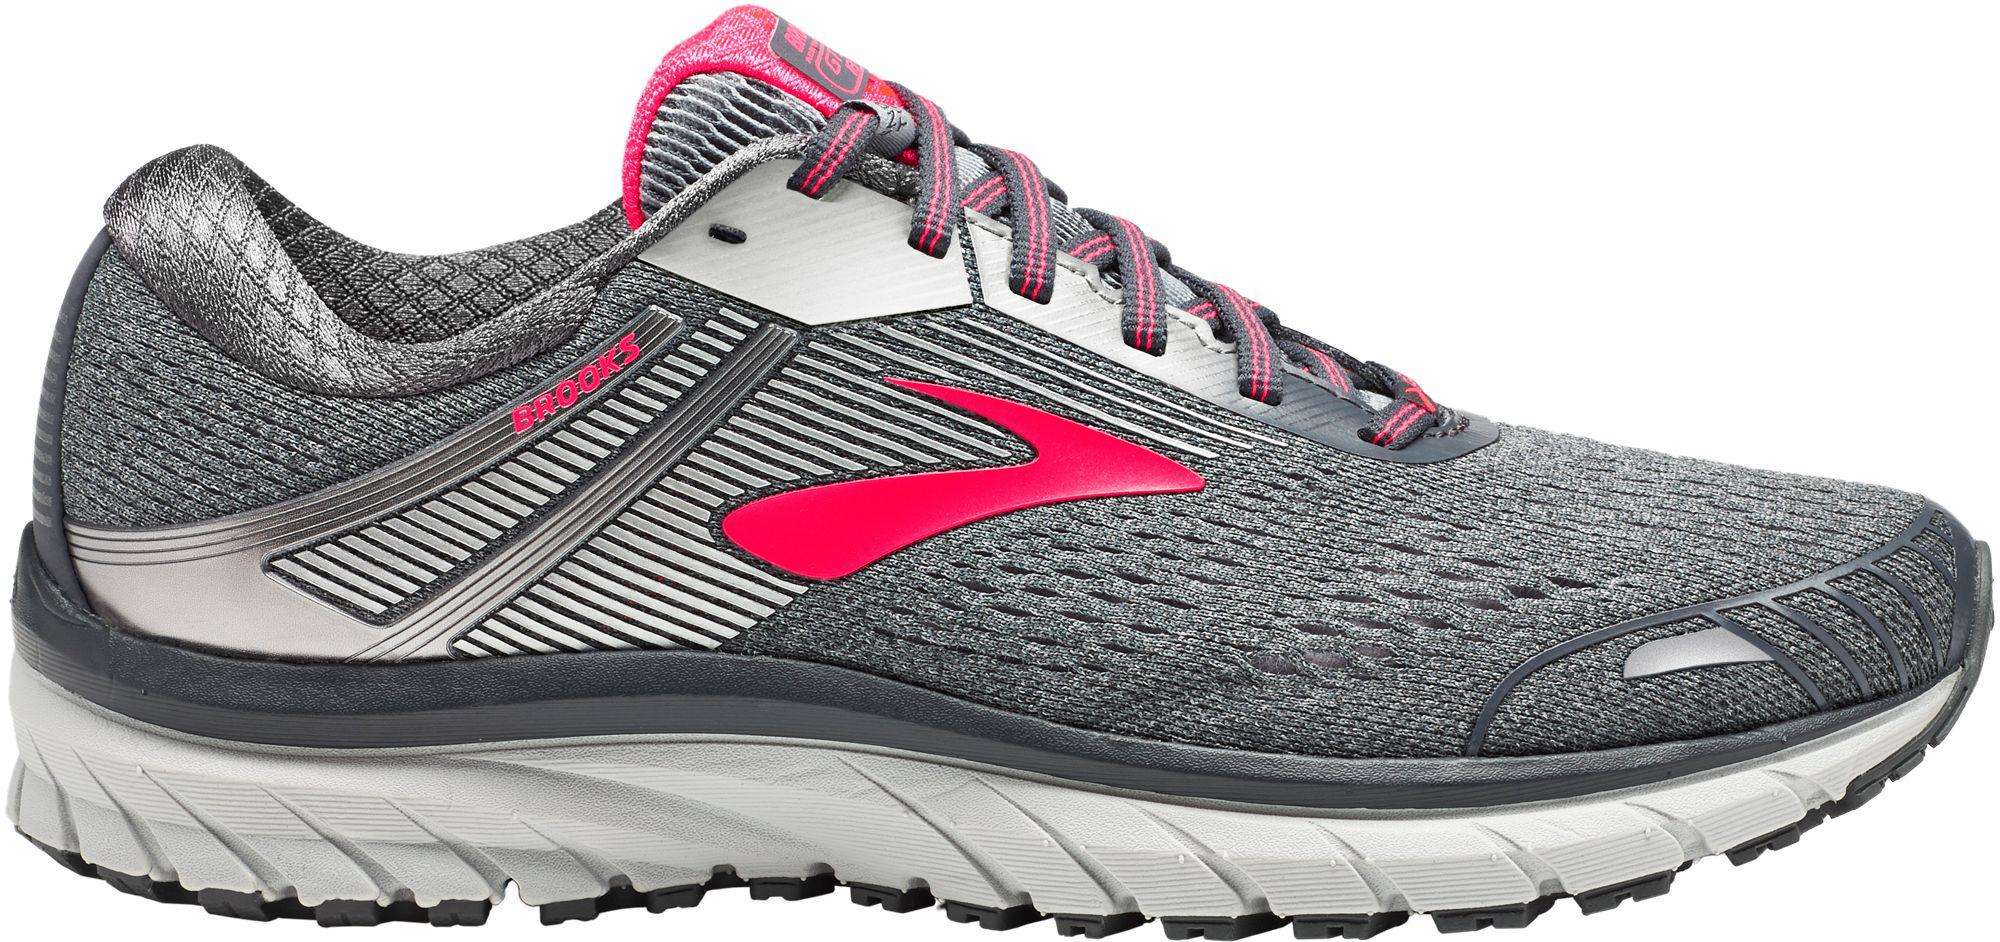 Brooks Adrenaline Gts 18 Running Shoes in Grey (Gray)